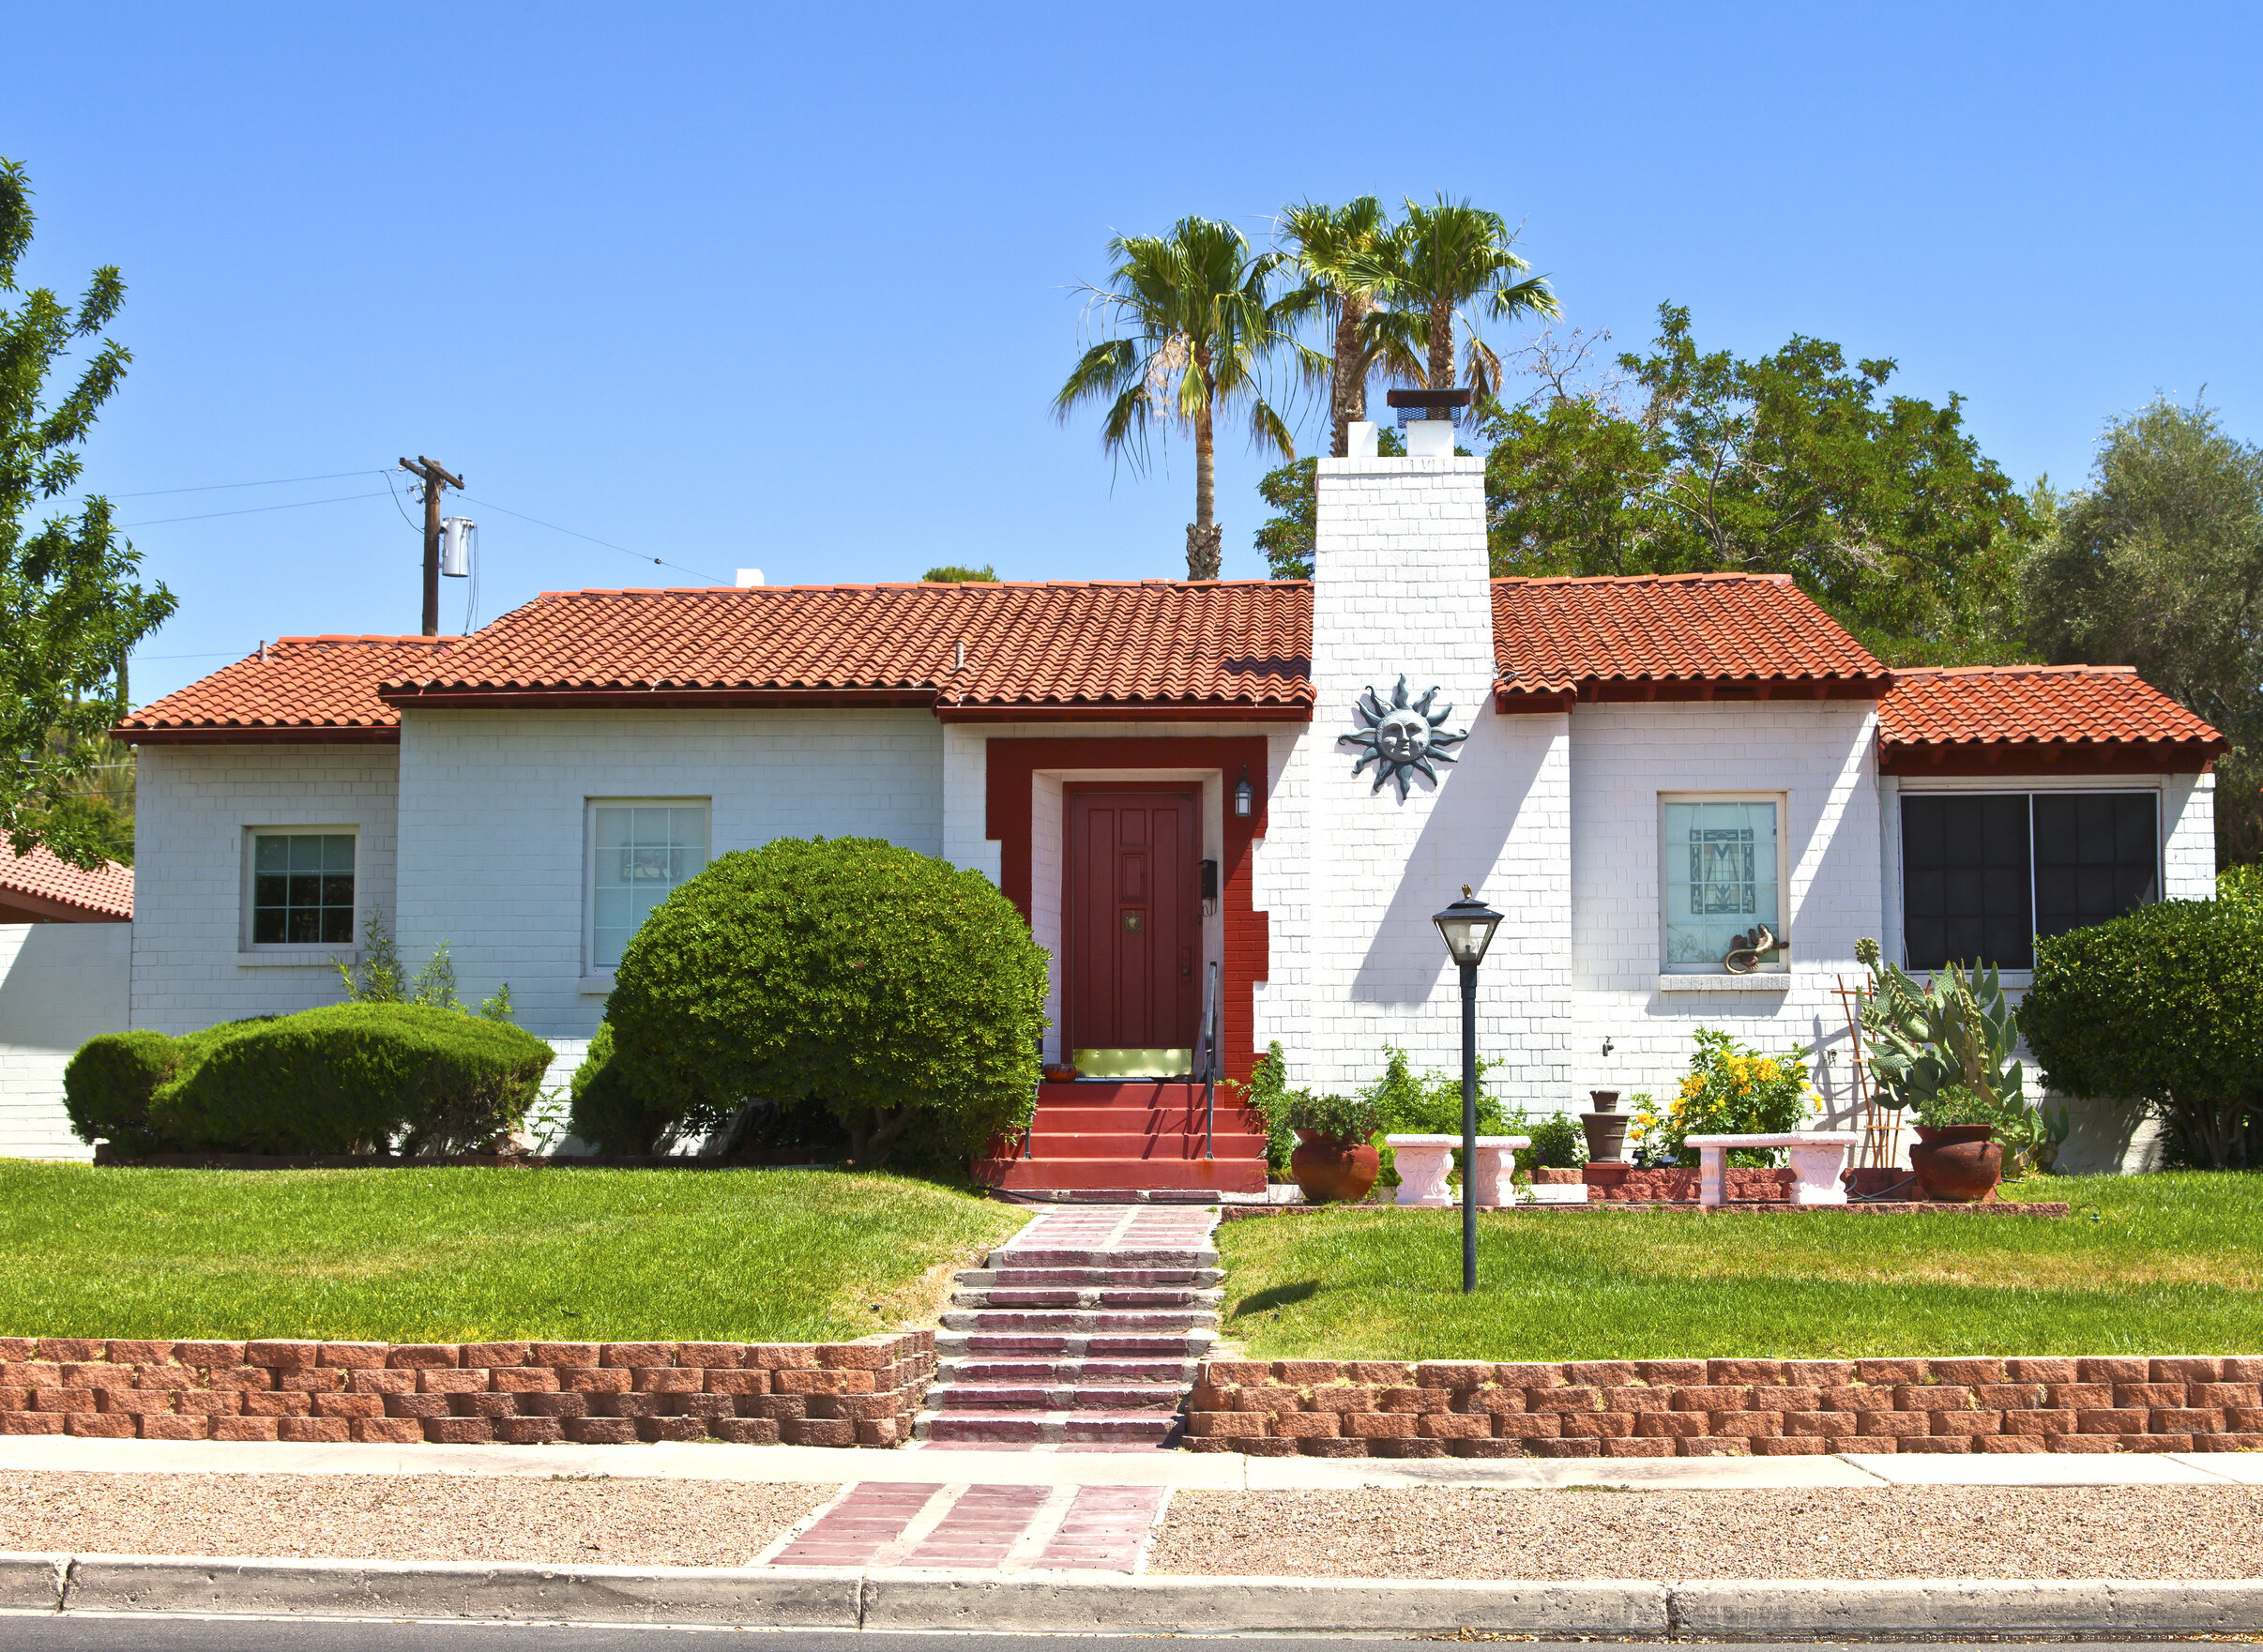 A white home in Nevada with a Spanish roof, red front door, green yard, and planters.